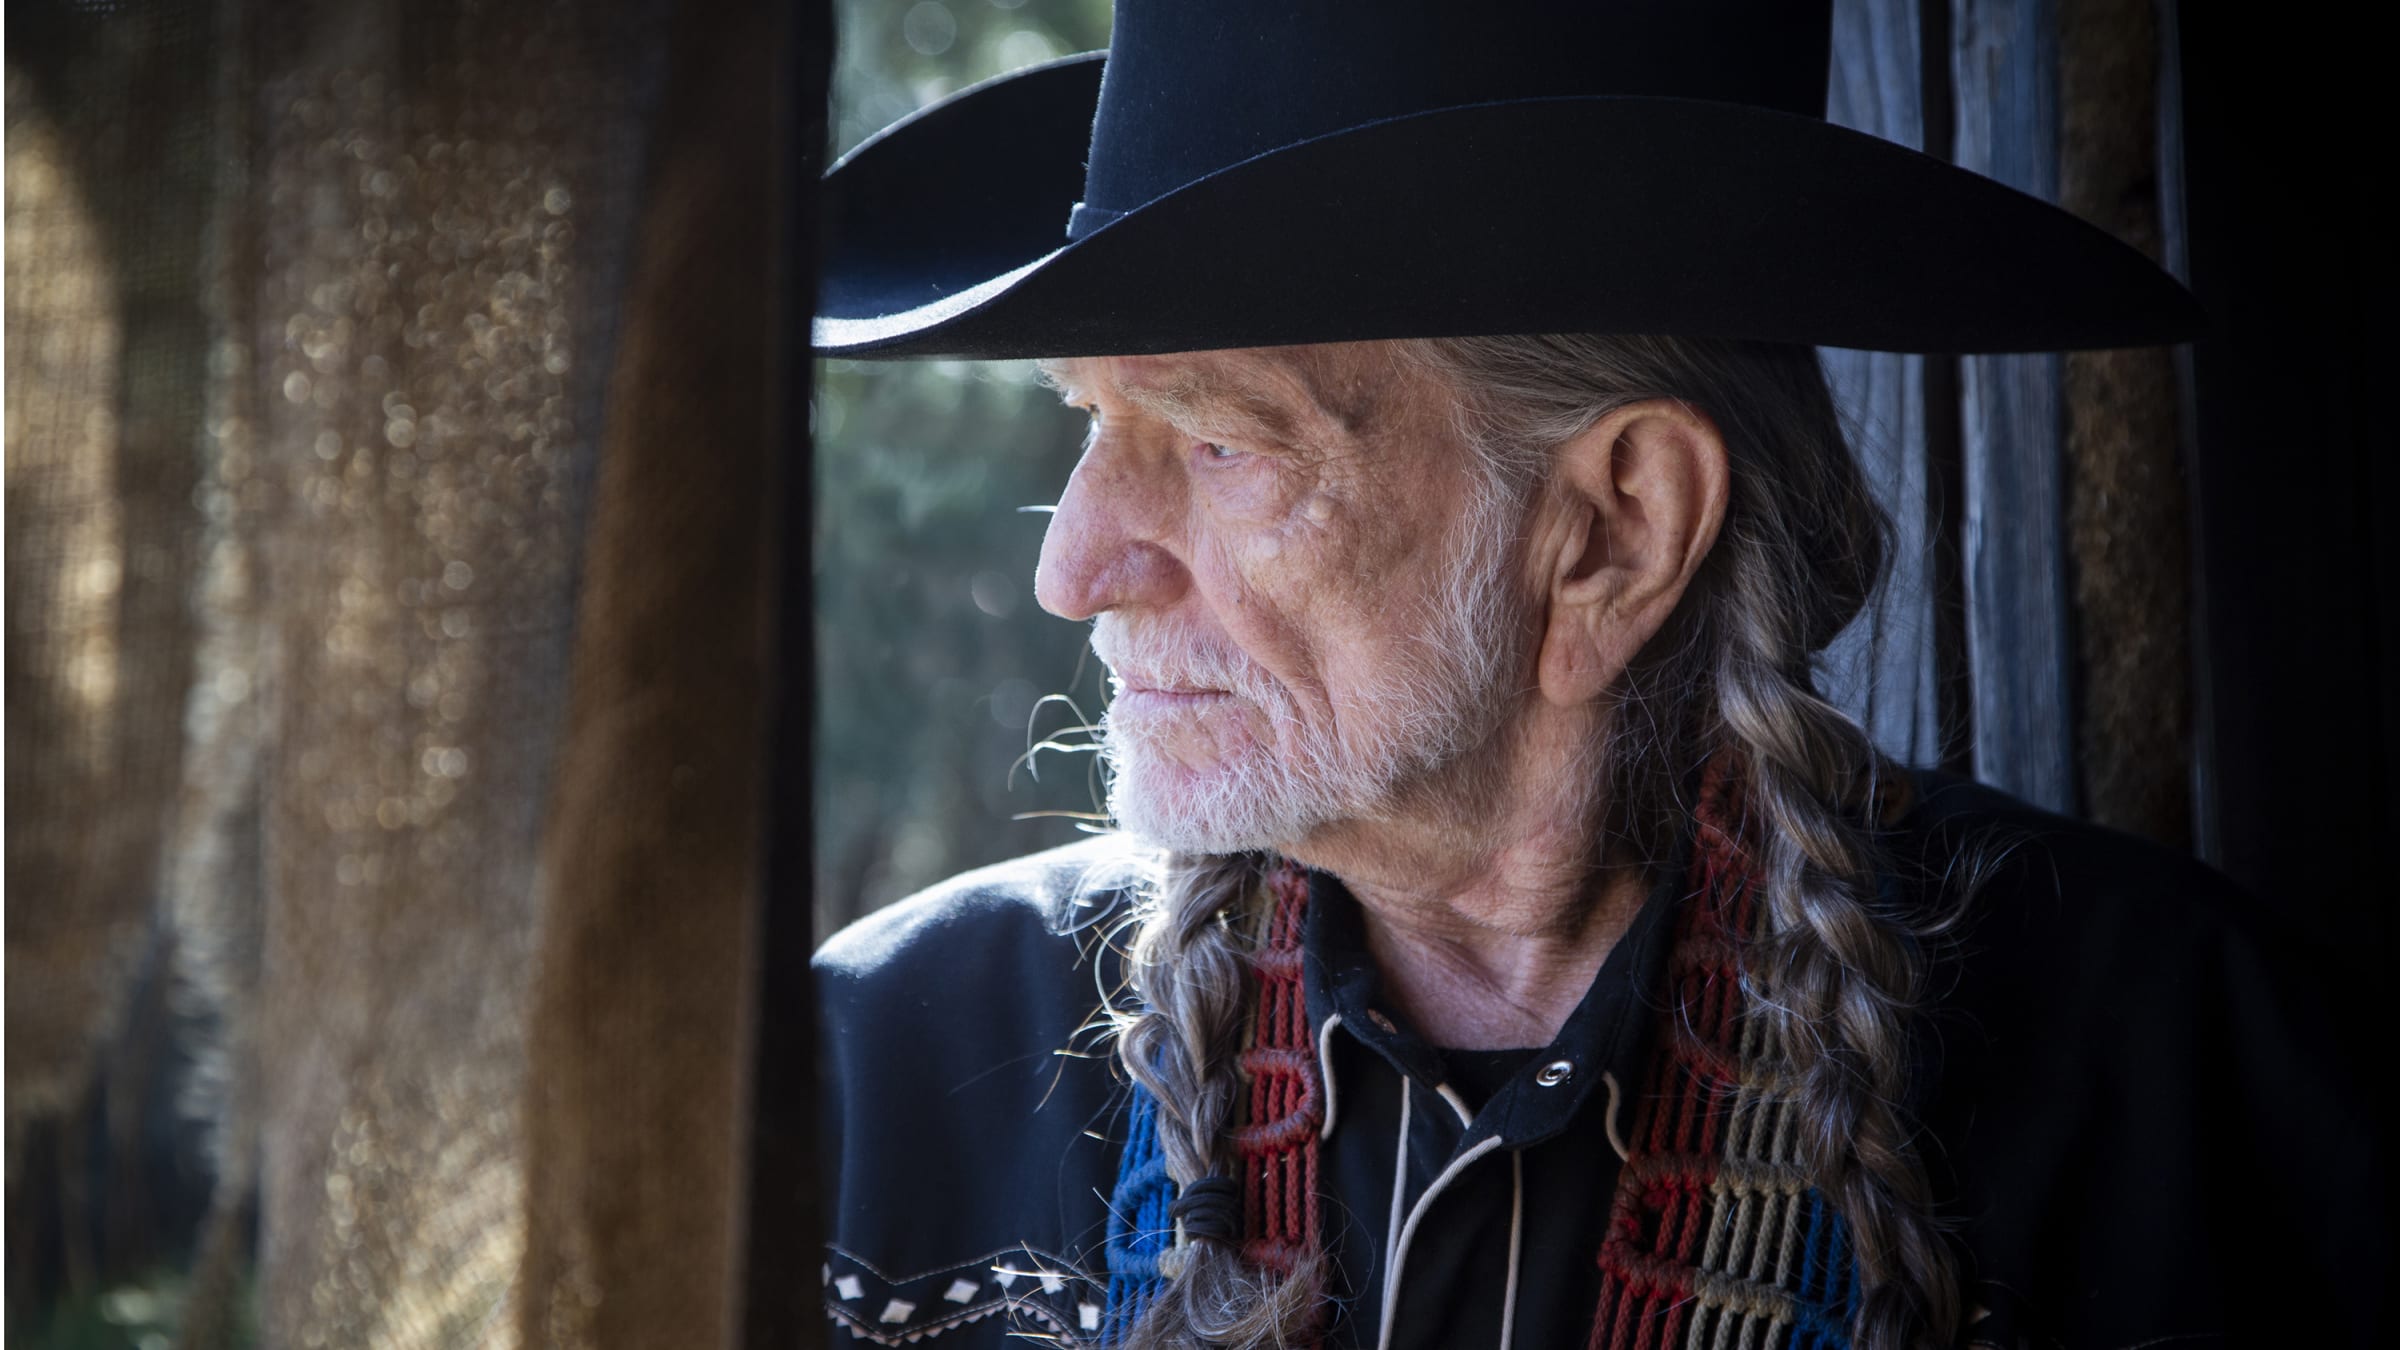 Willie Nelson's Pot-Fueled Poker Game